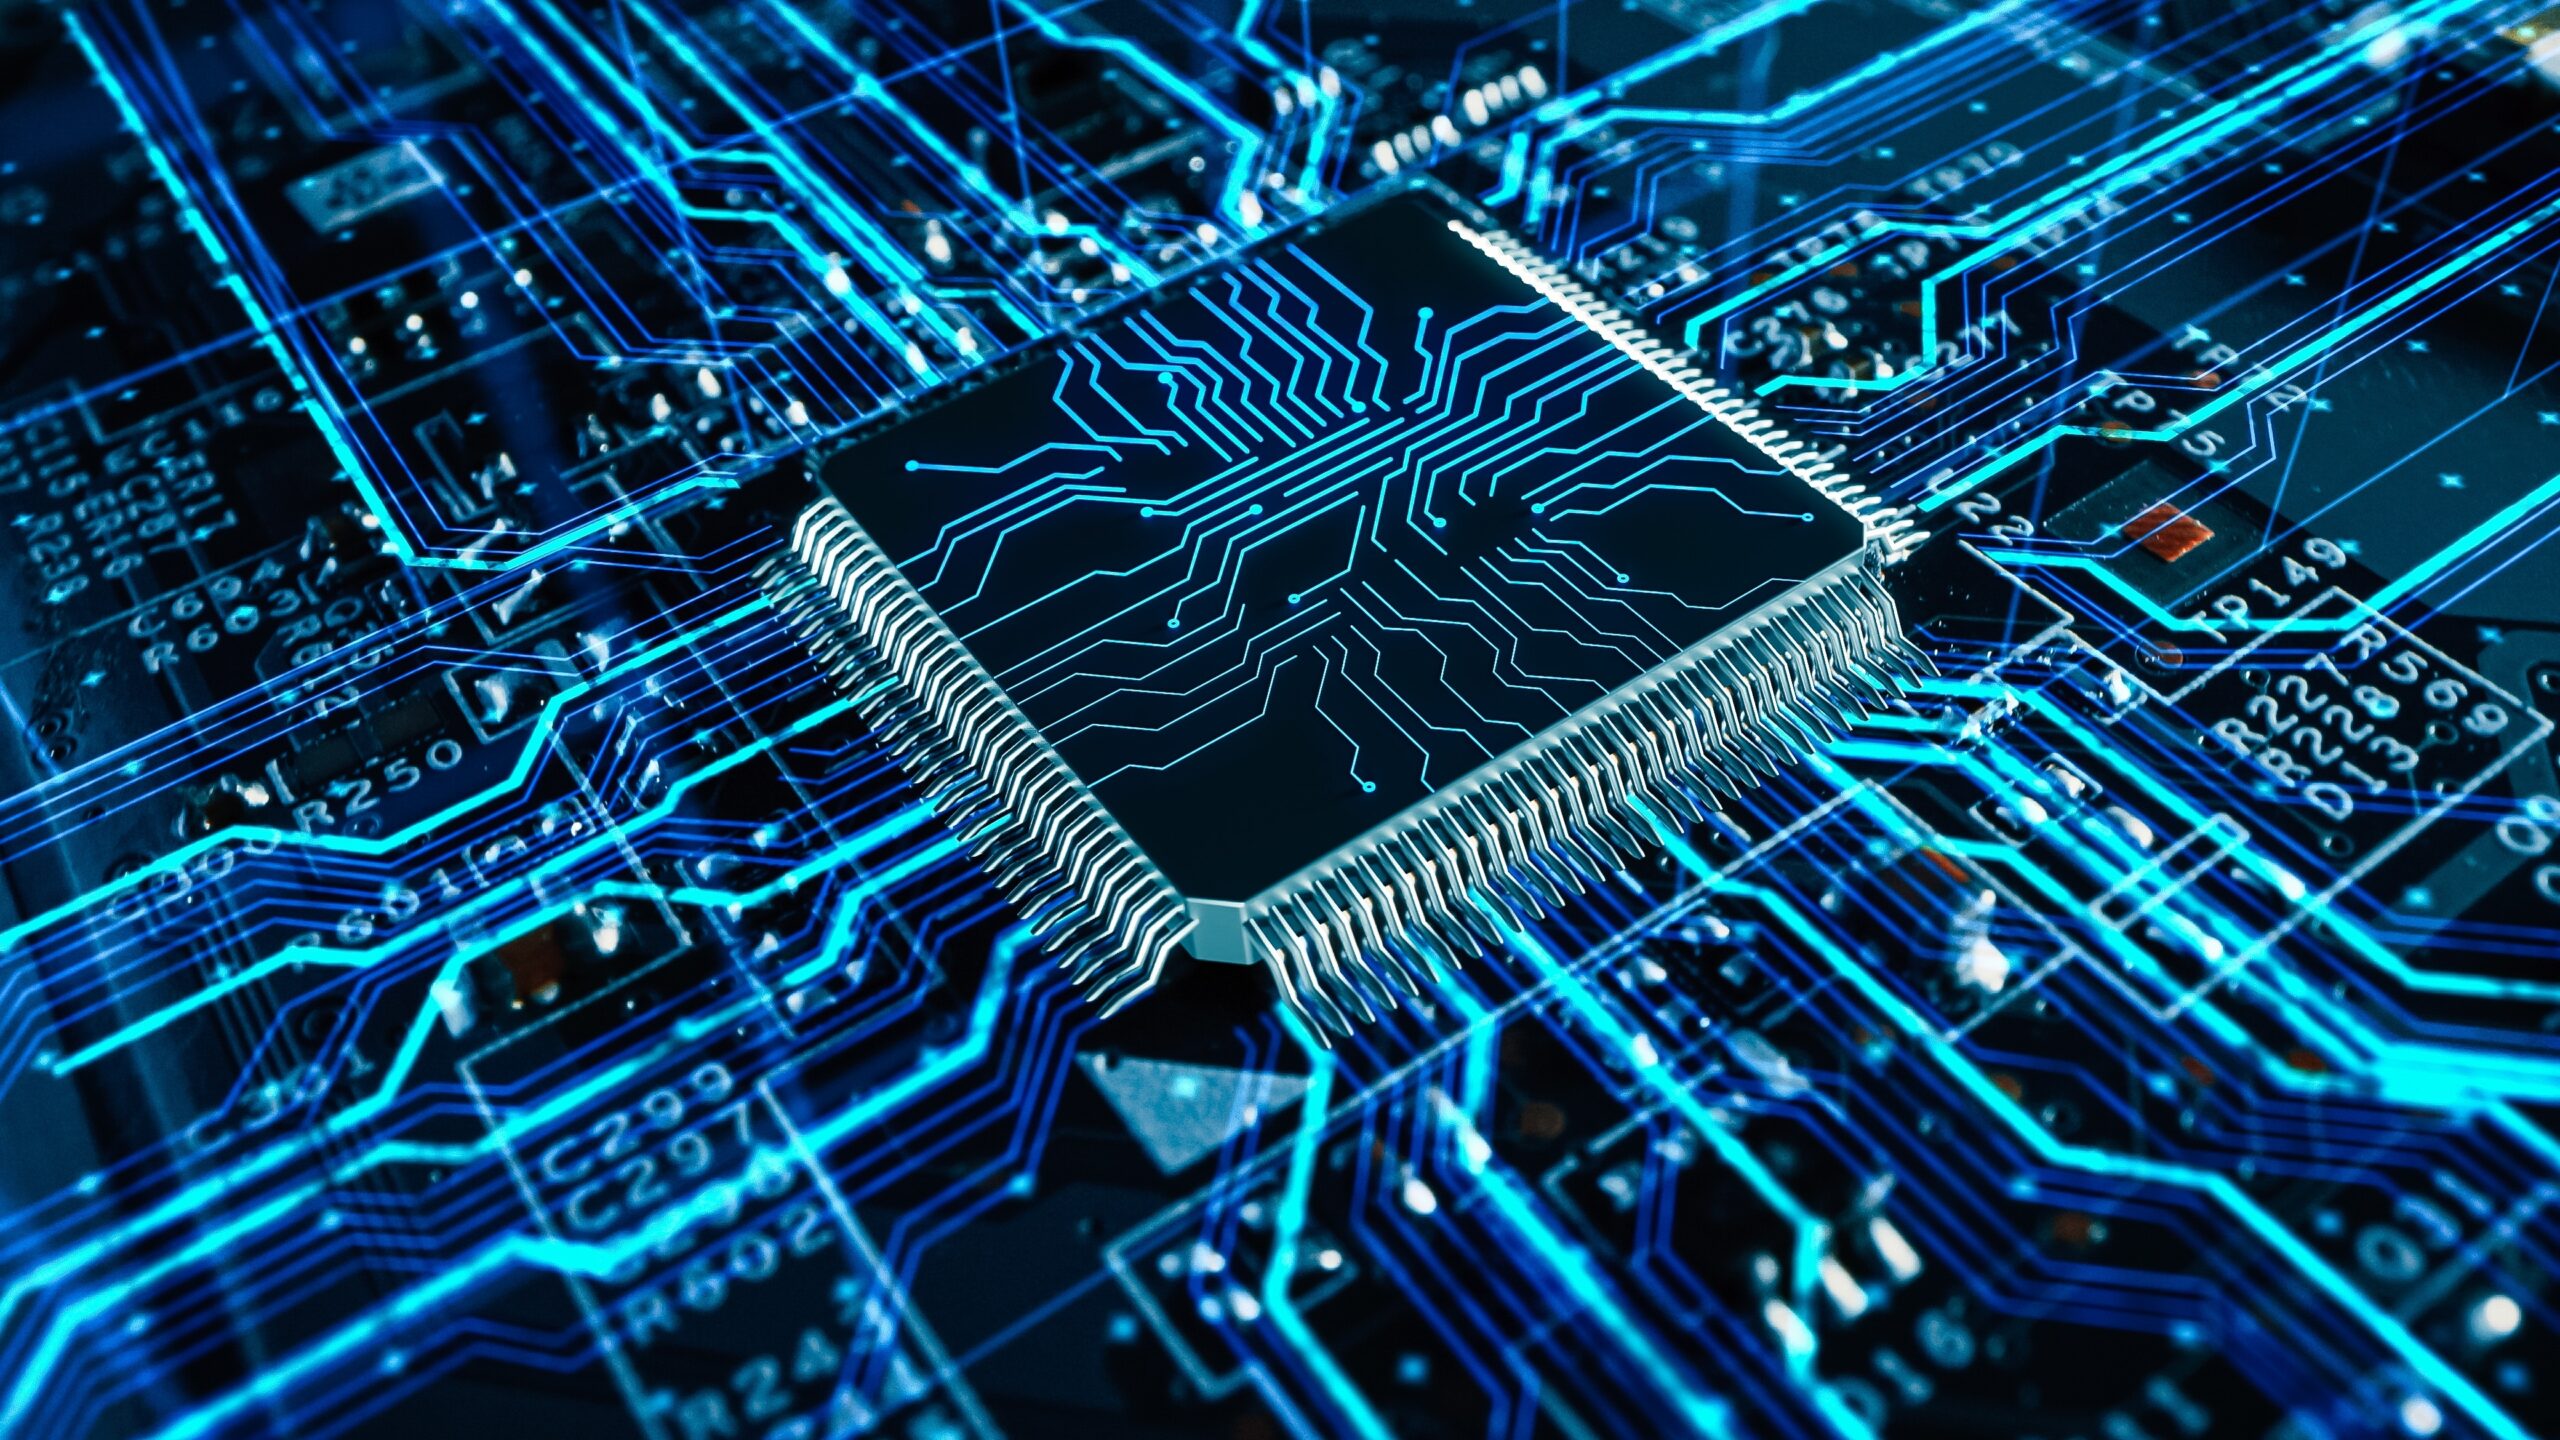 A close-up view of a microchip on a circuit board. The microchip is centrally positioned and connected to a network of glowing blue lines representing electronic pathways on the dark blue-toned circuit board. - CSA Catapult